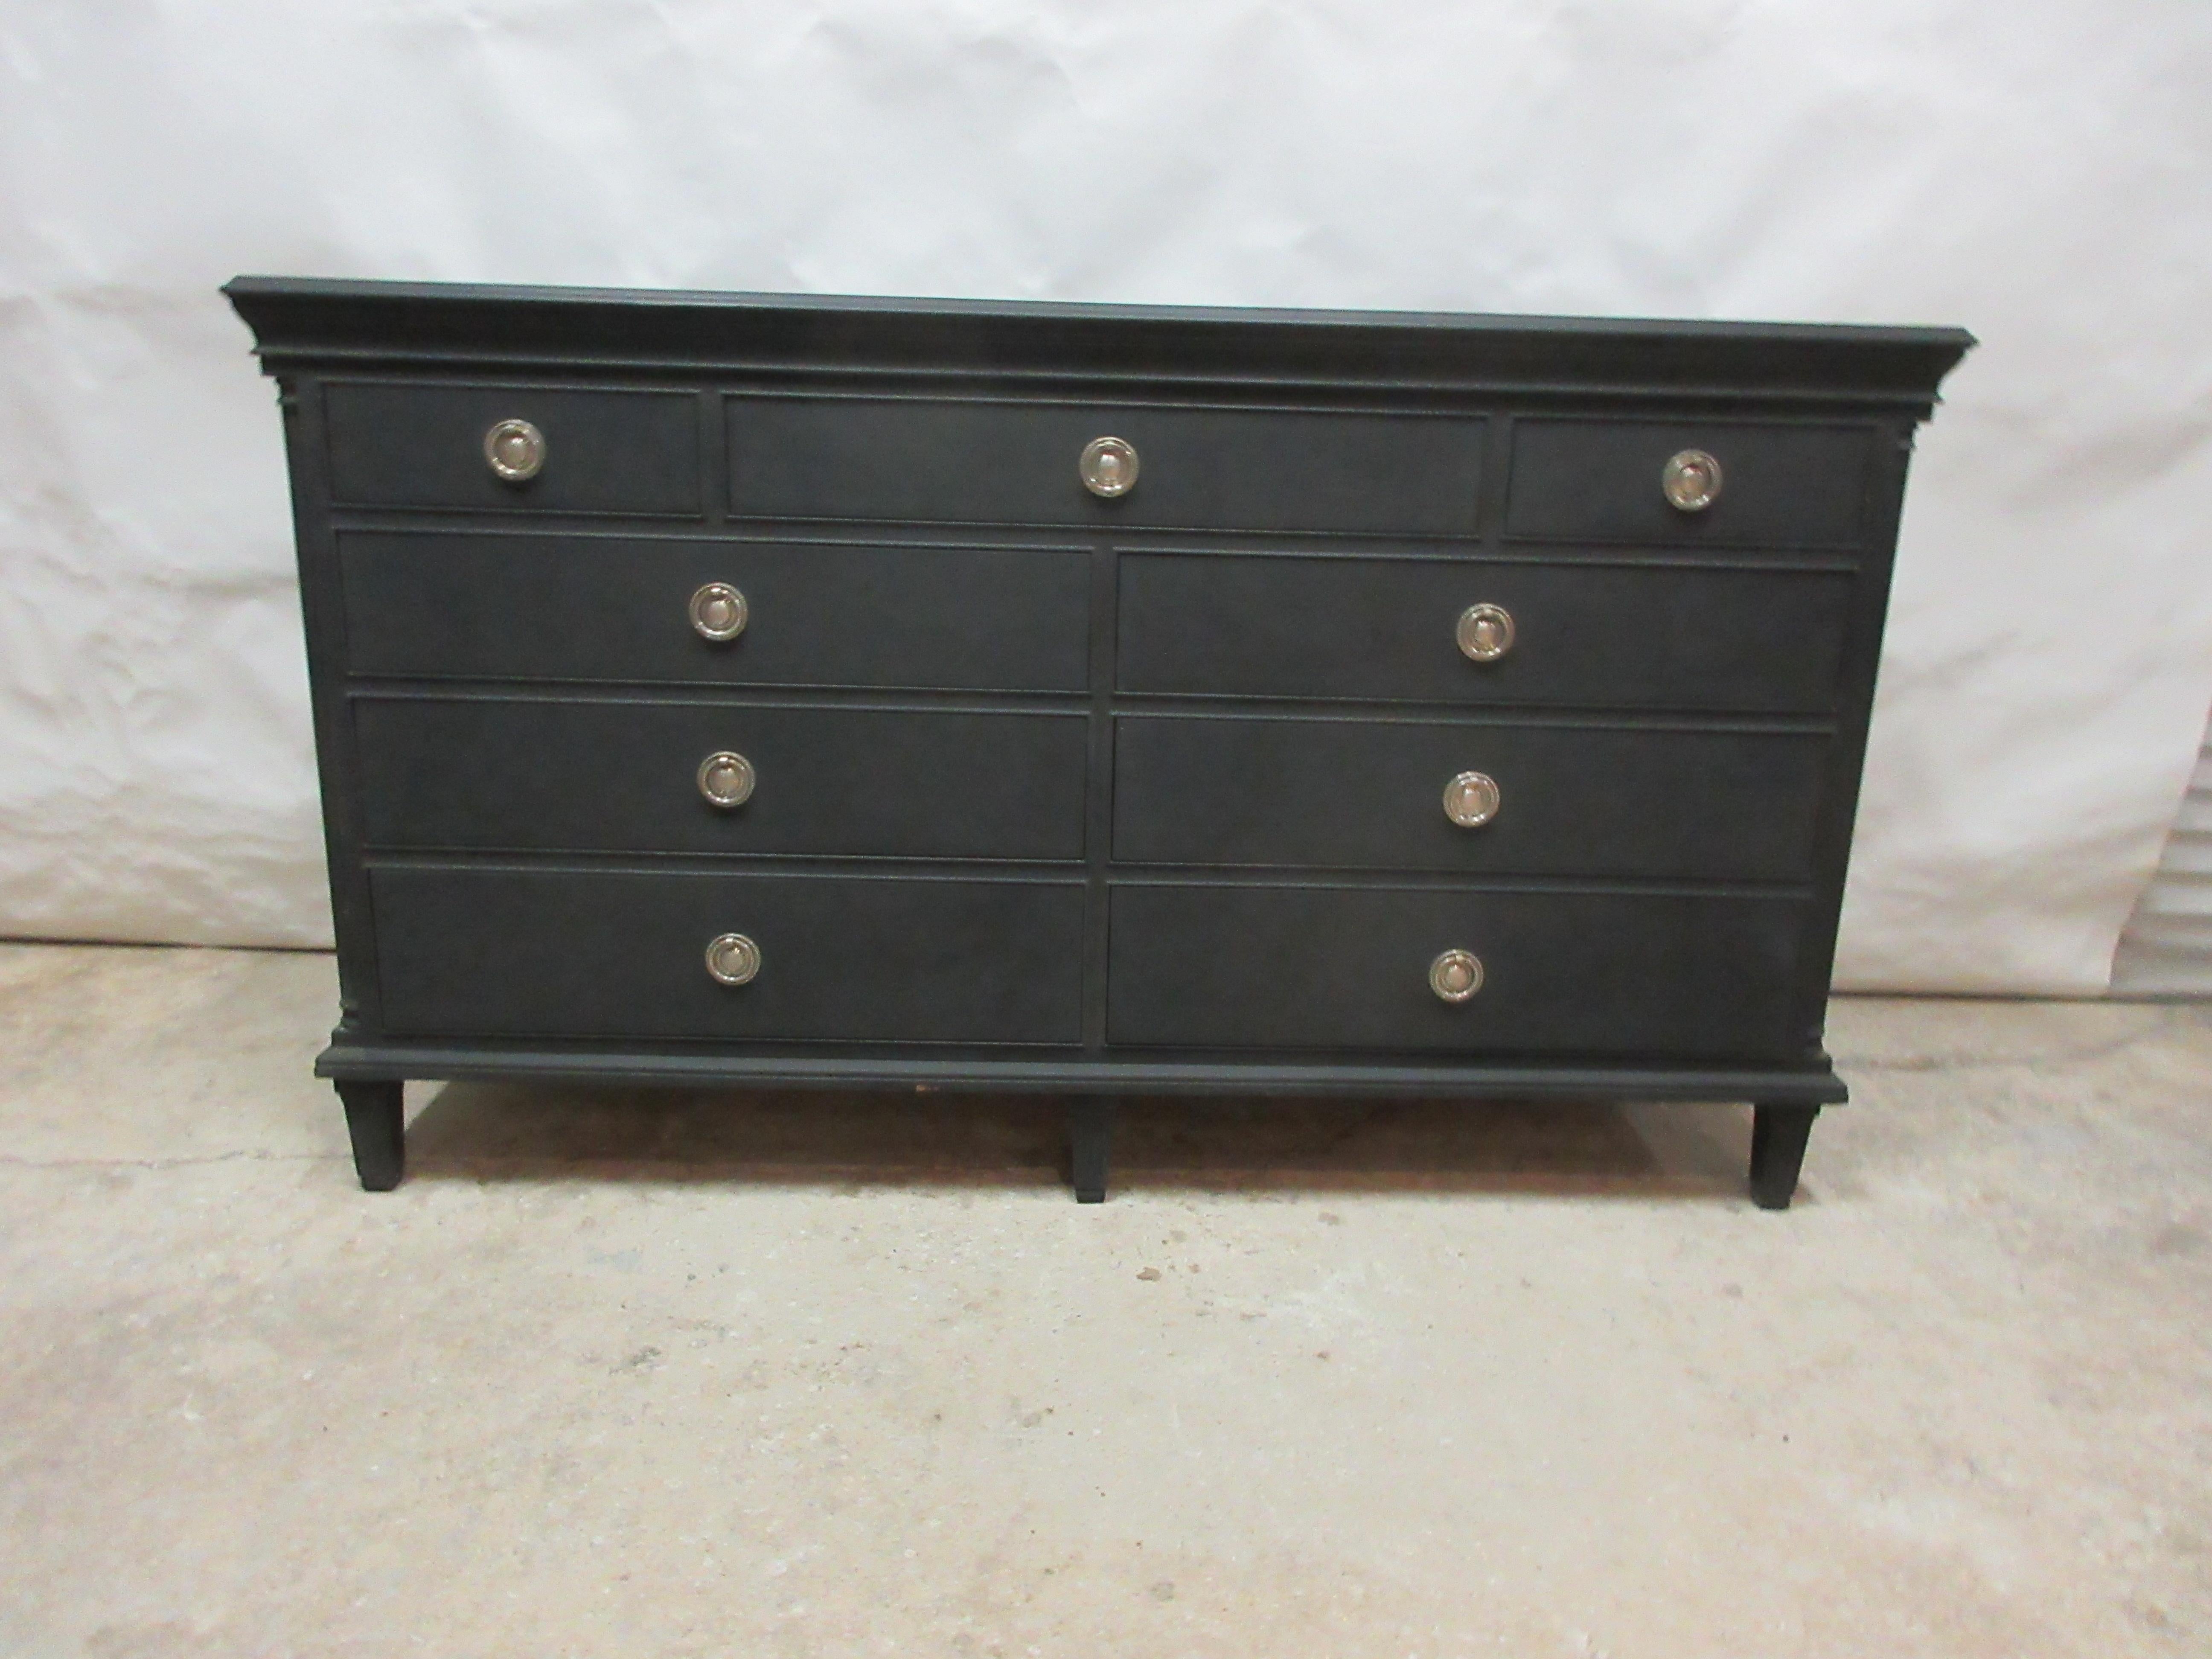 This is an unusual Gustavian style 9 drawer black dresser, its been restored and repainted with Milk Paints 